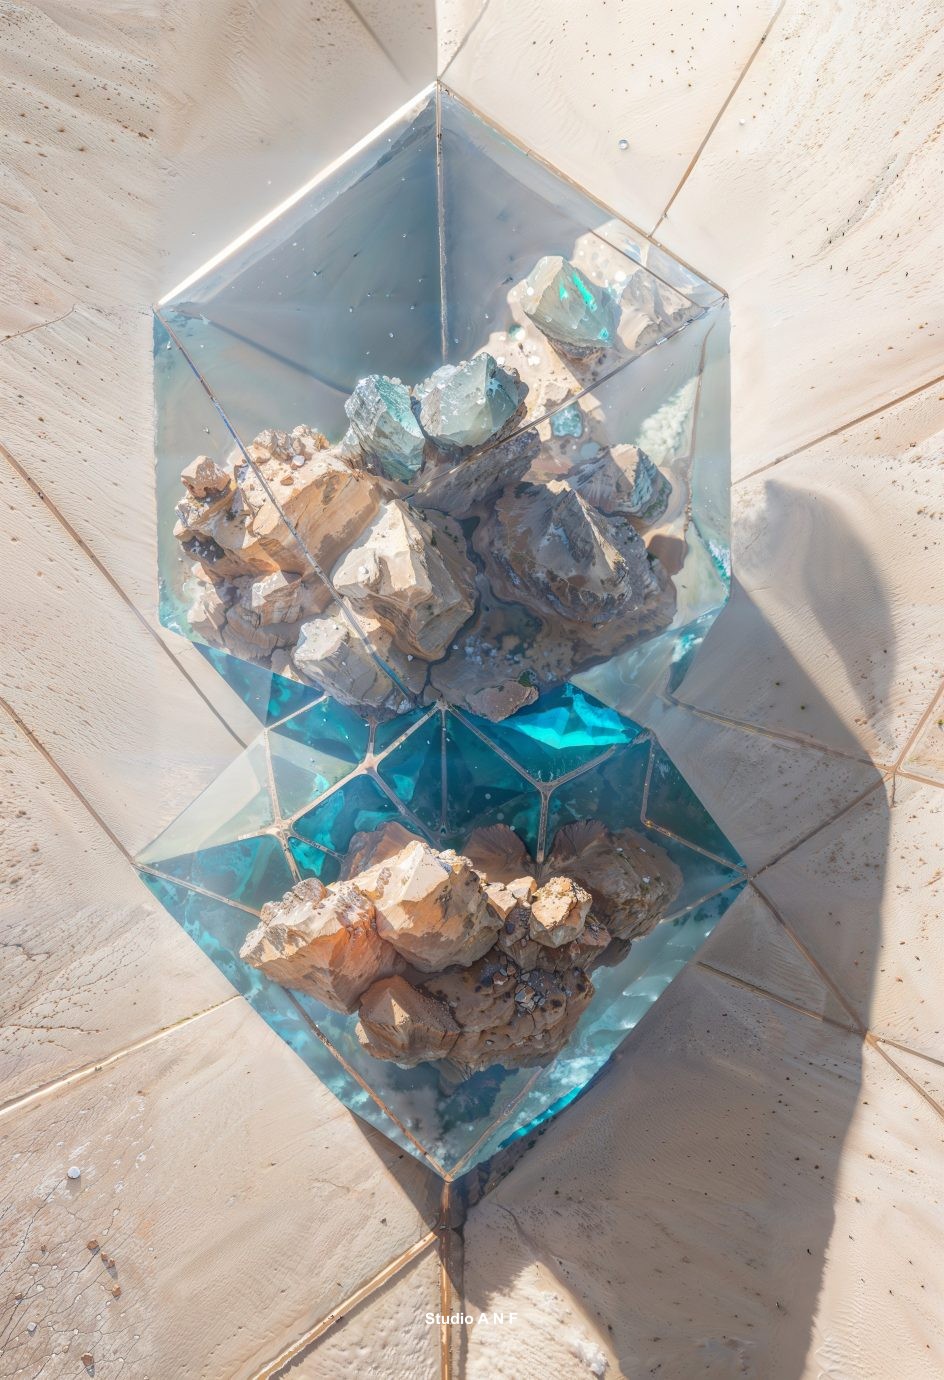 A geometric crystal sculpture comprising clear and aqua-tinted glass segments encapsulating rugged brown rocks, placed on a textured sandy surface under bright lighting.